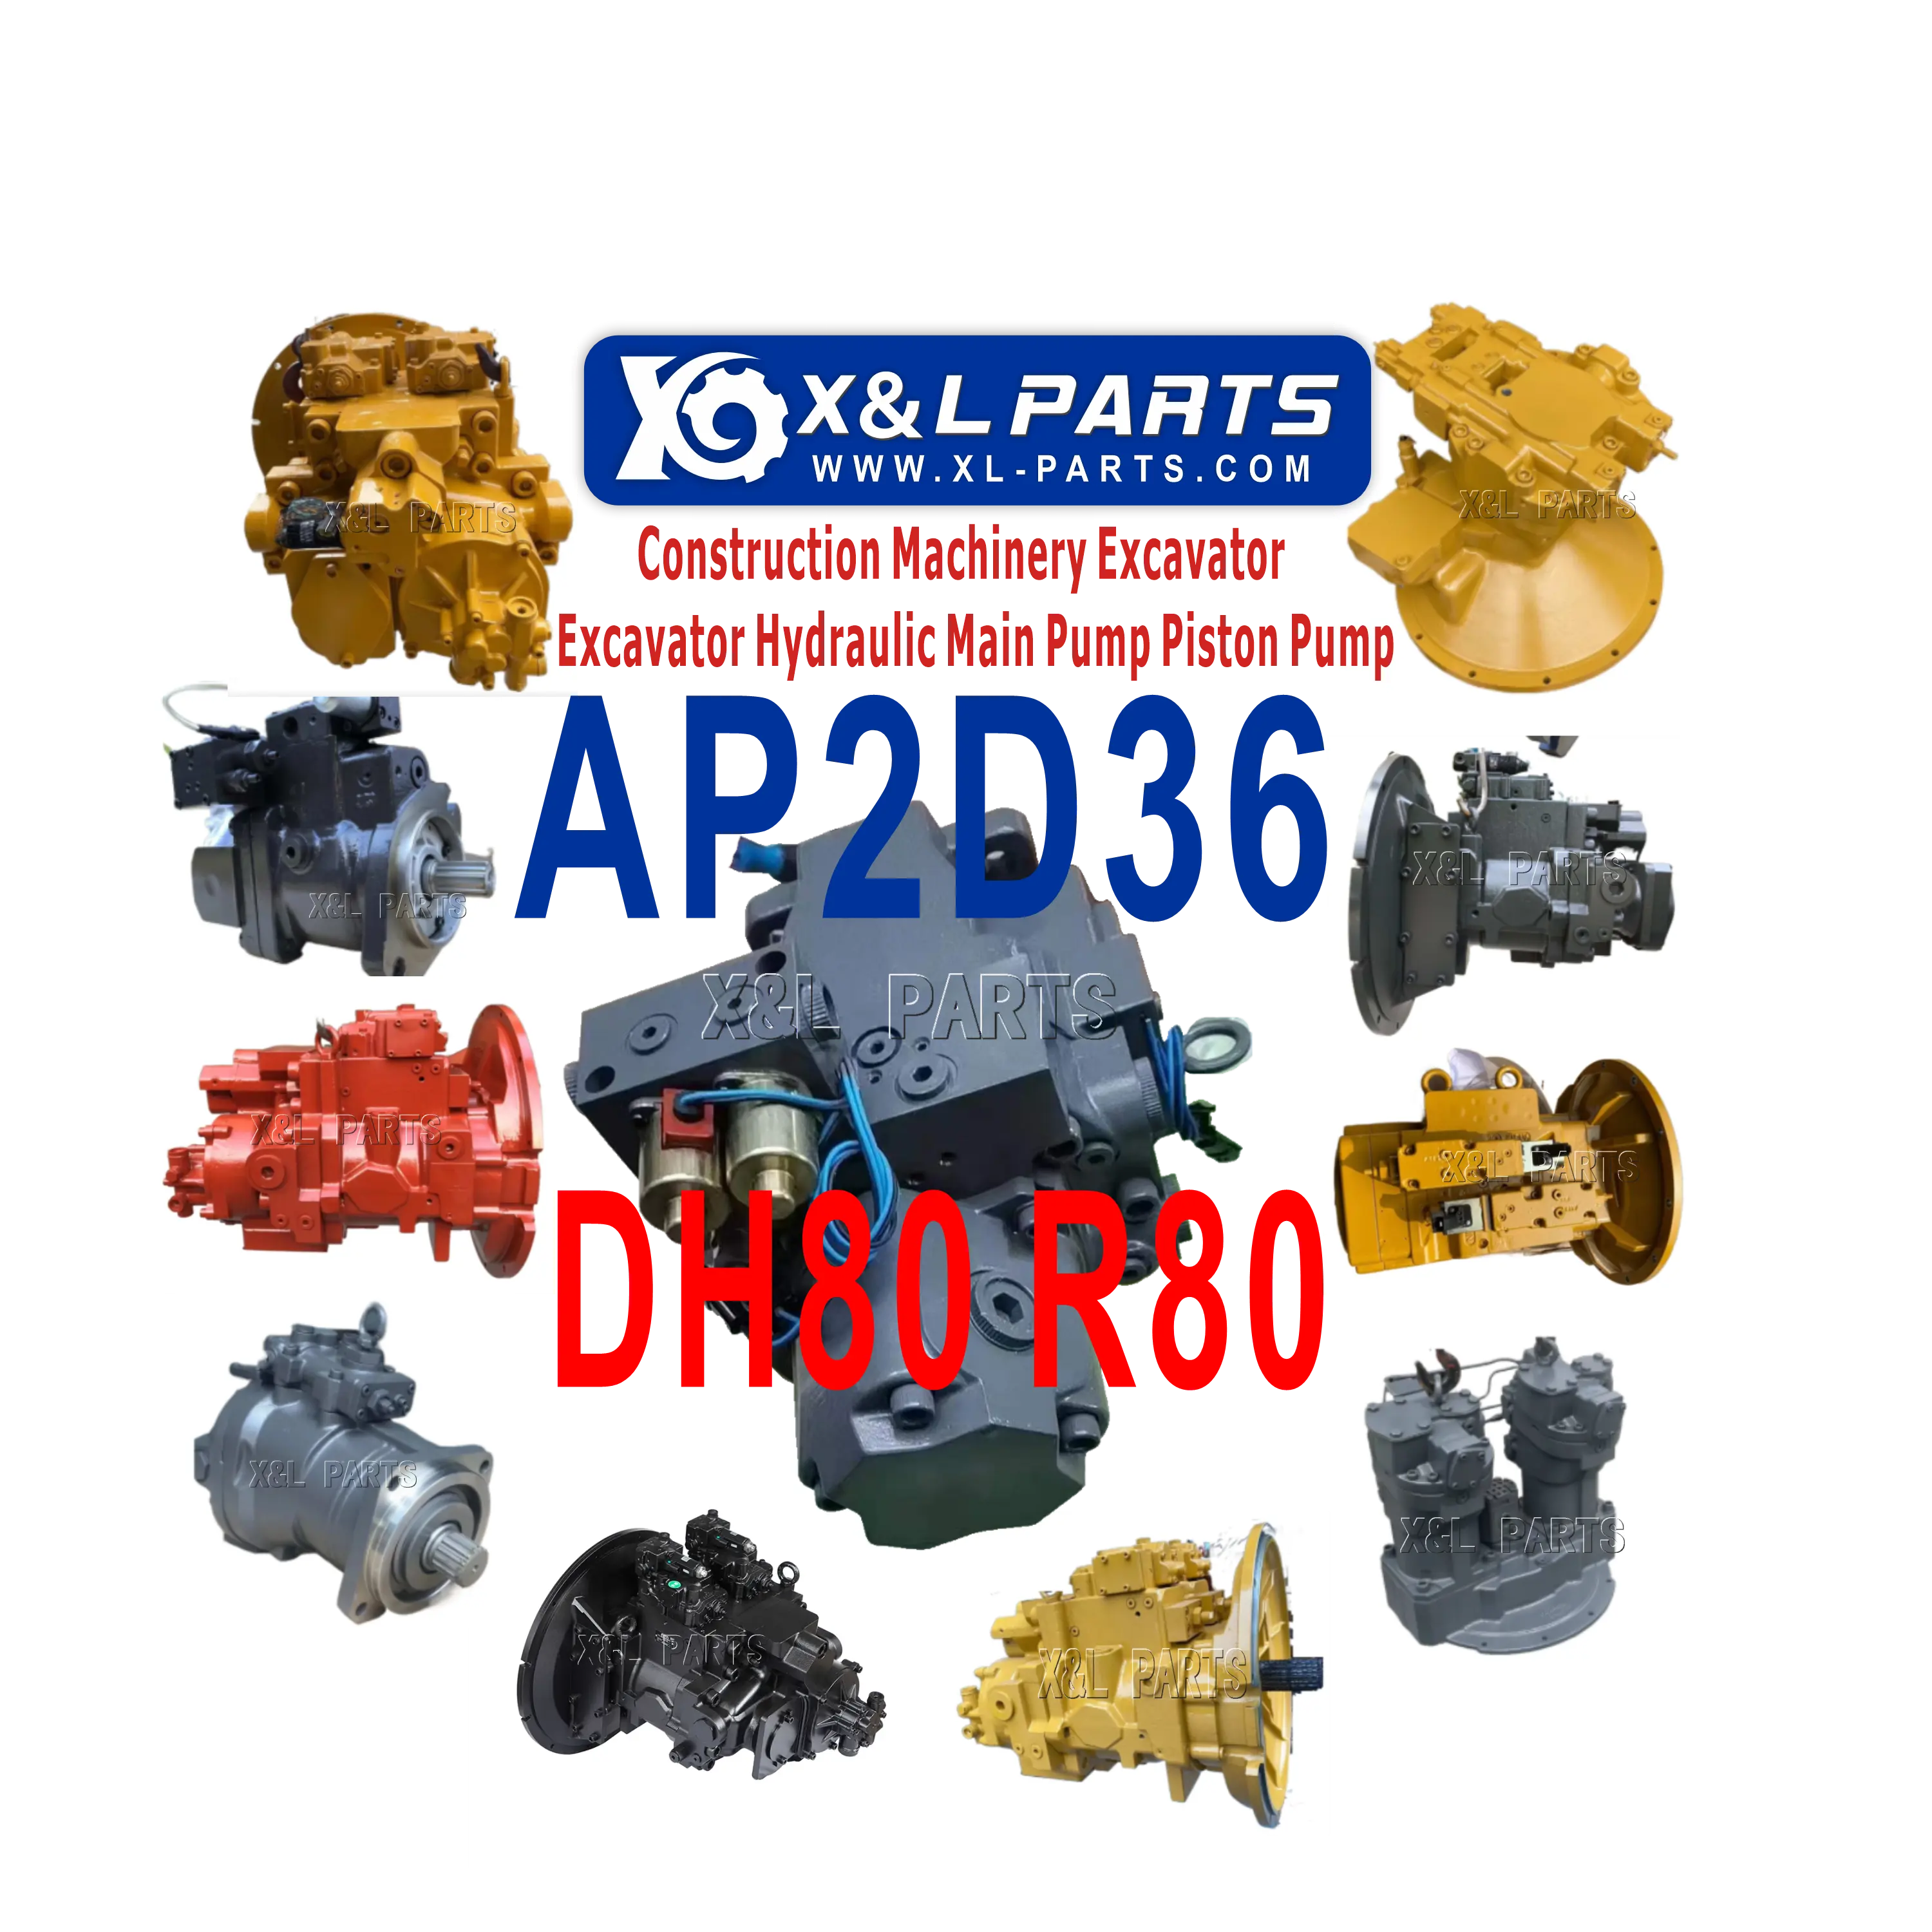 X&L-parts AP2D36-LV1PS7-880-0 31N1-10011 hydraulic pump with solenoid valve for Hyundai Excavator R80 For Daewoo Excavator DH80